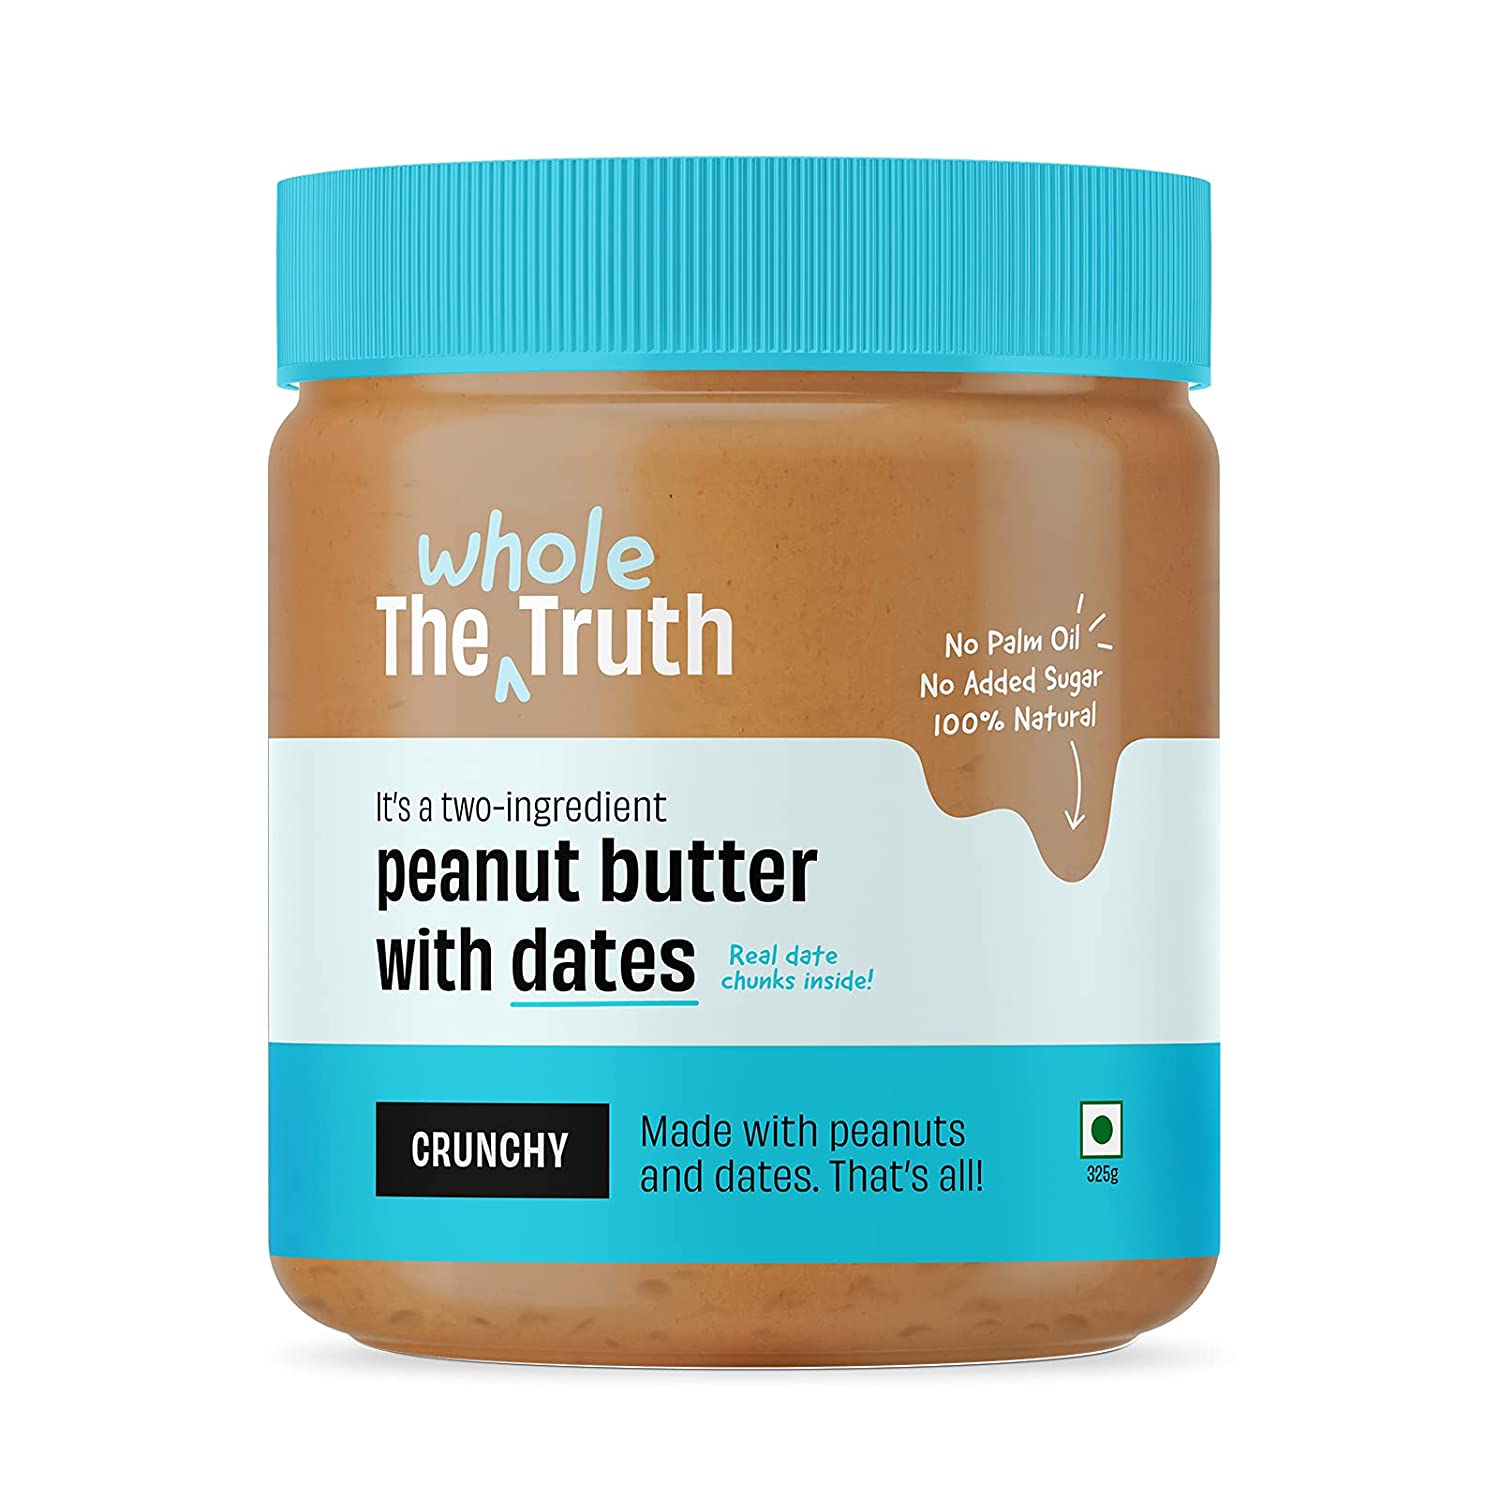 The Whole Truth Peanut Butter With Dates Crunchy Image